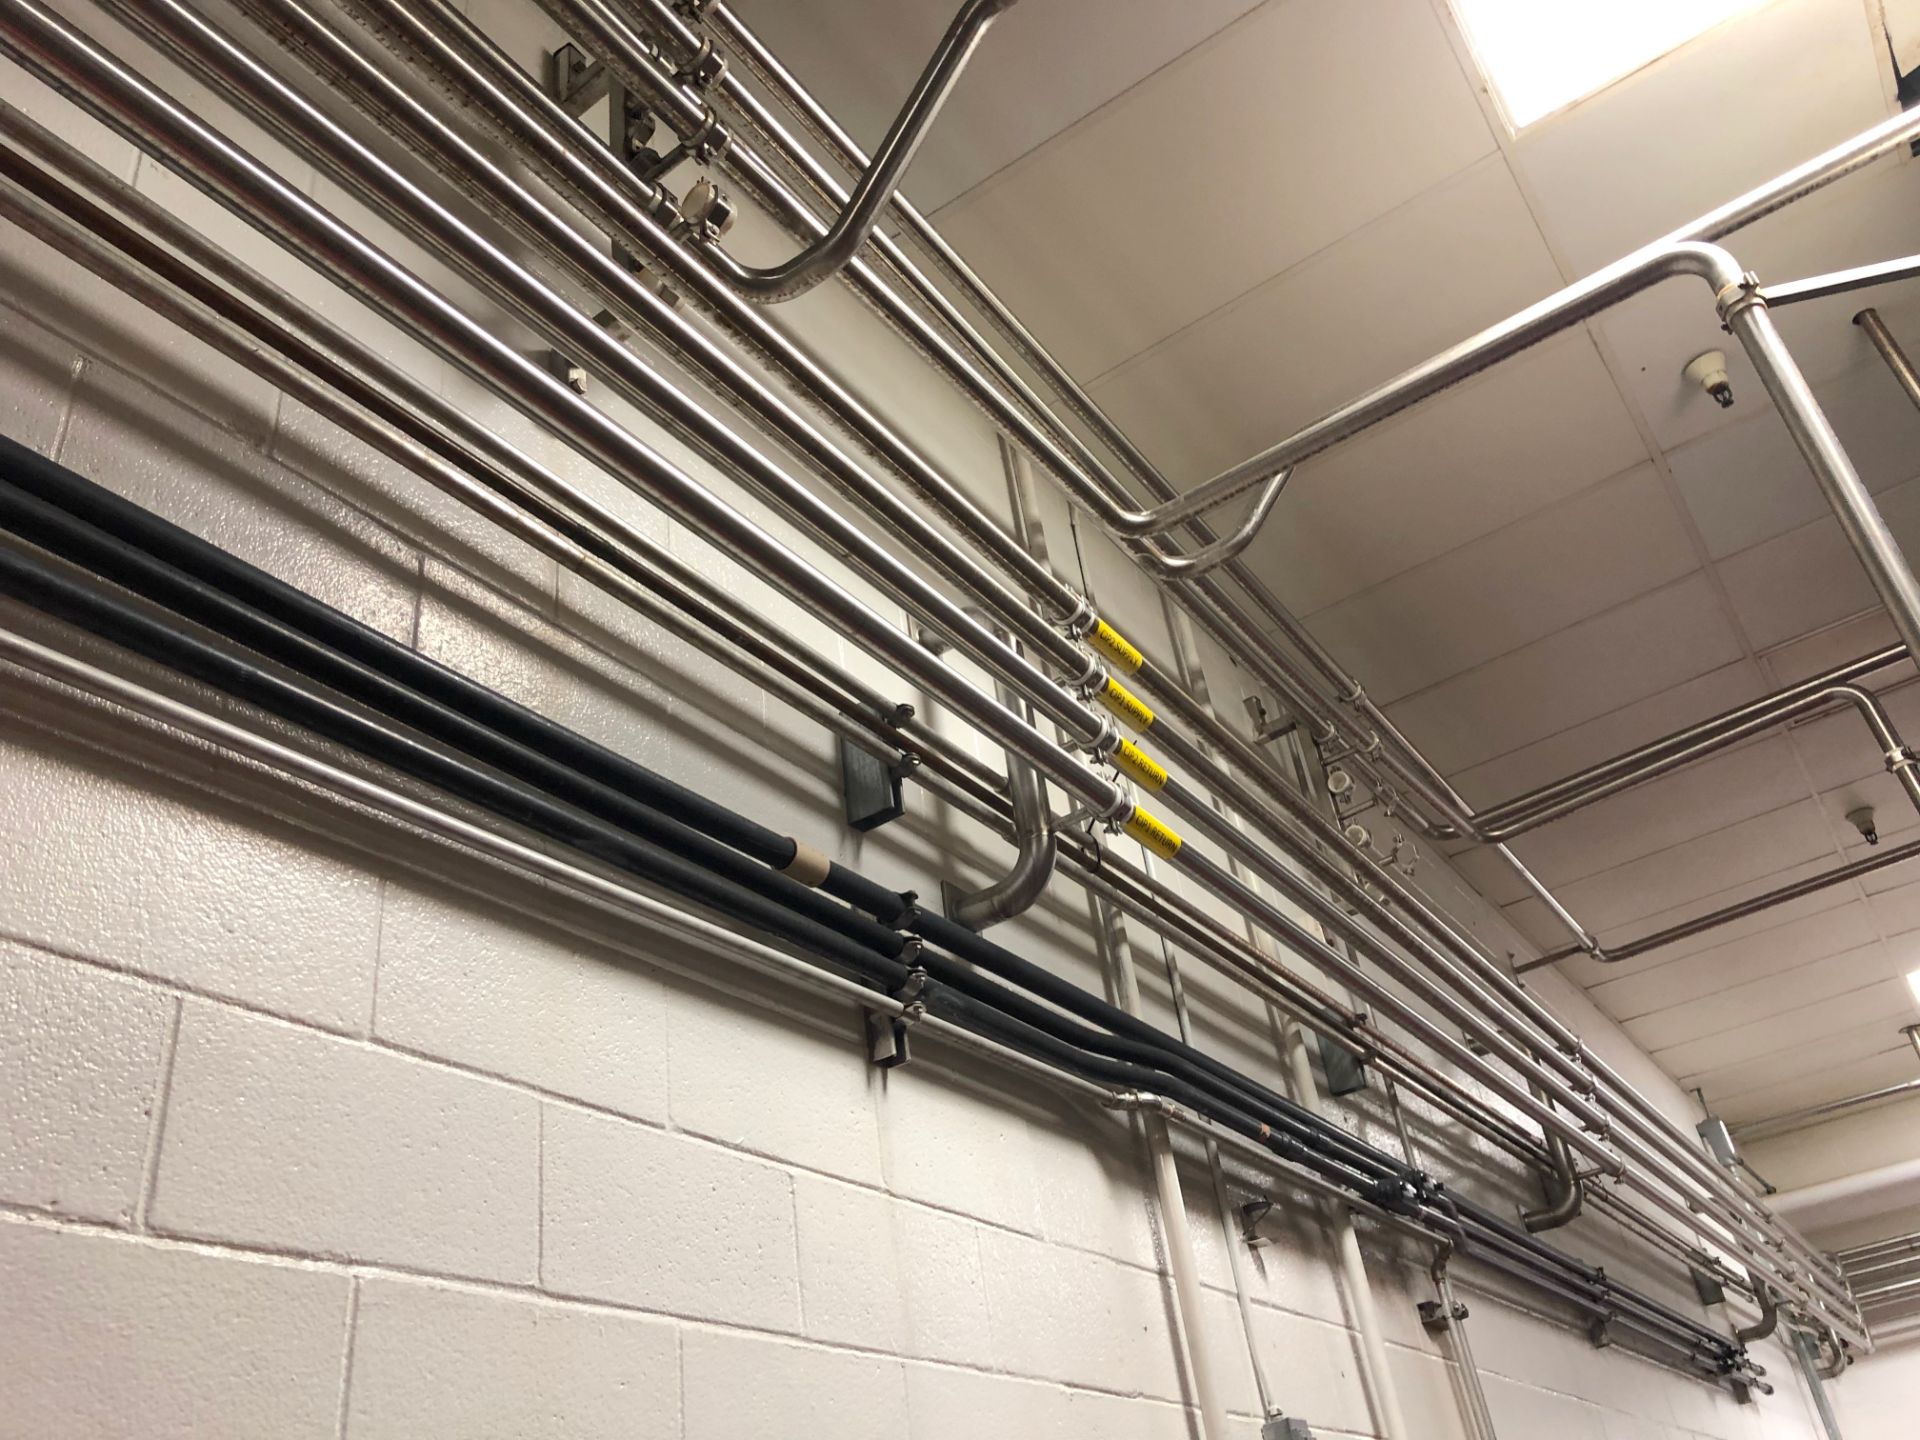 Stainless Steel Piping - Image 4 of 8